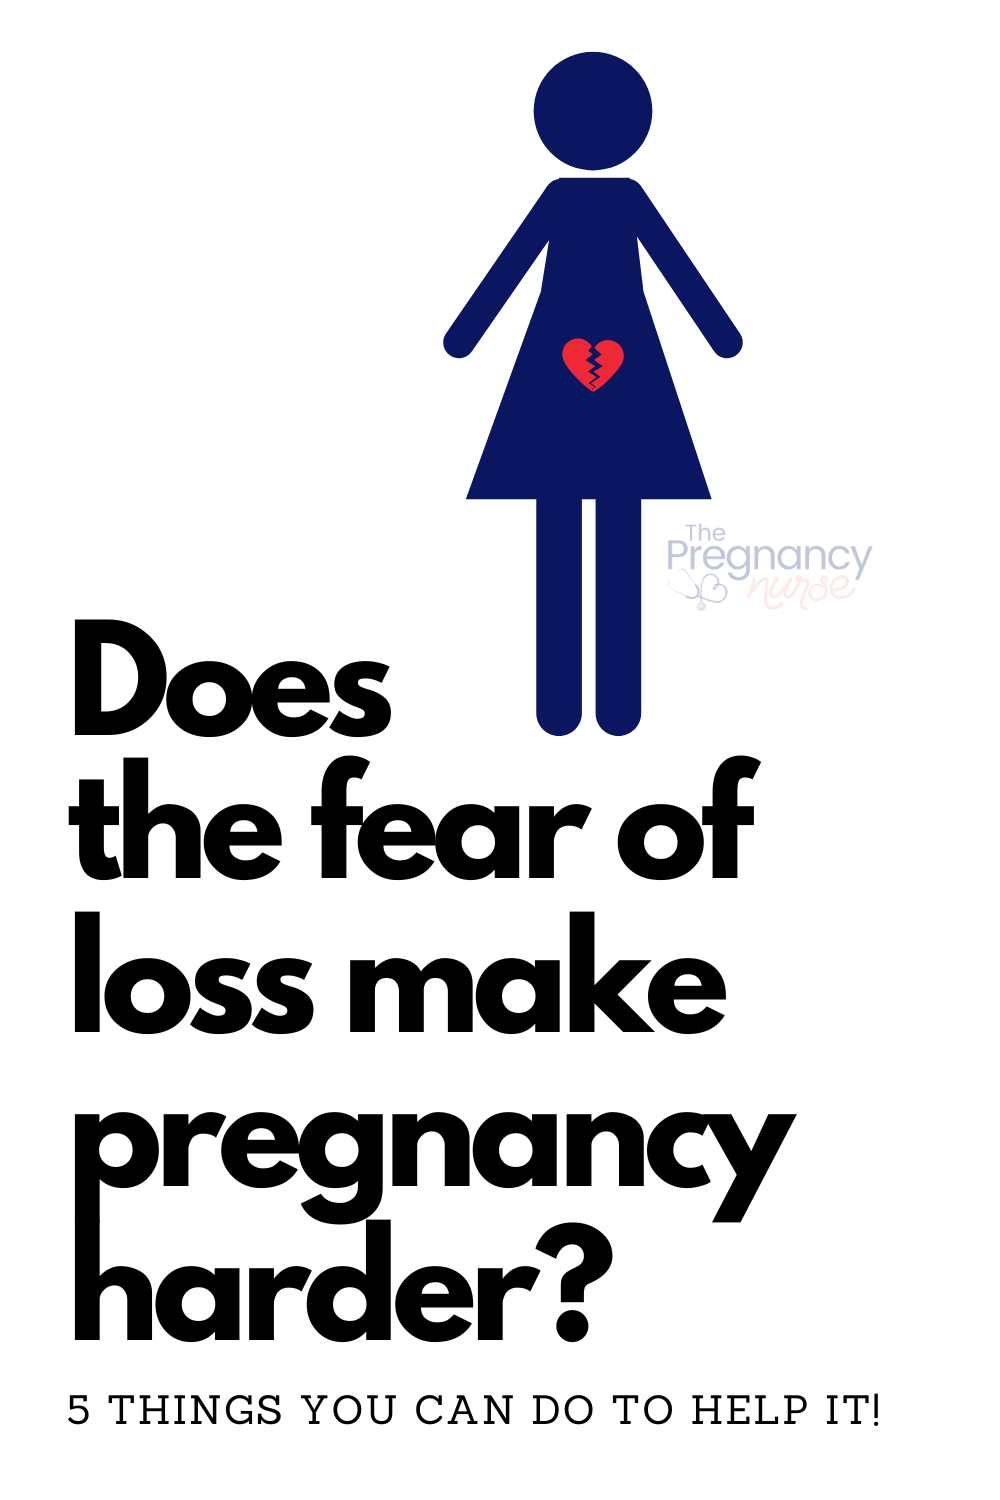 Dealing with fear of miscarriage or loss during pregnancy? Find support and coping strategies to manage anxiety. From staying informed to seeking emotional support, empower yourself to navigate your pregnancy journey. #PregnancyAnxiety #MiscarriageFear #EmotionalSupport